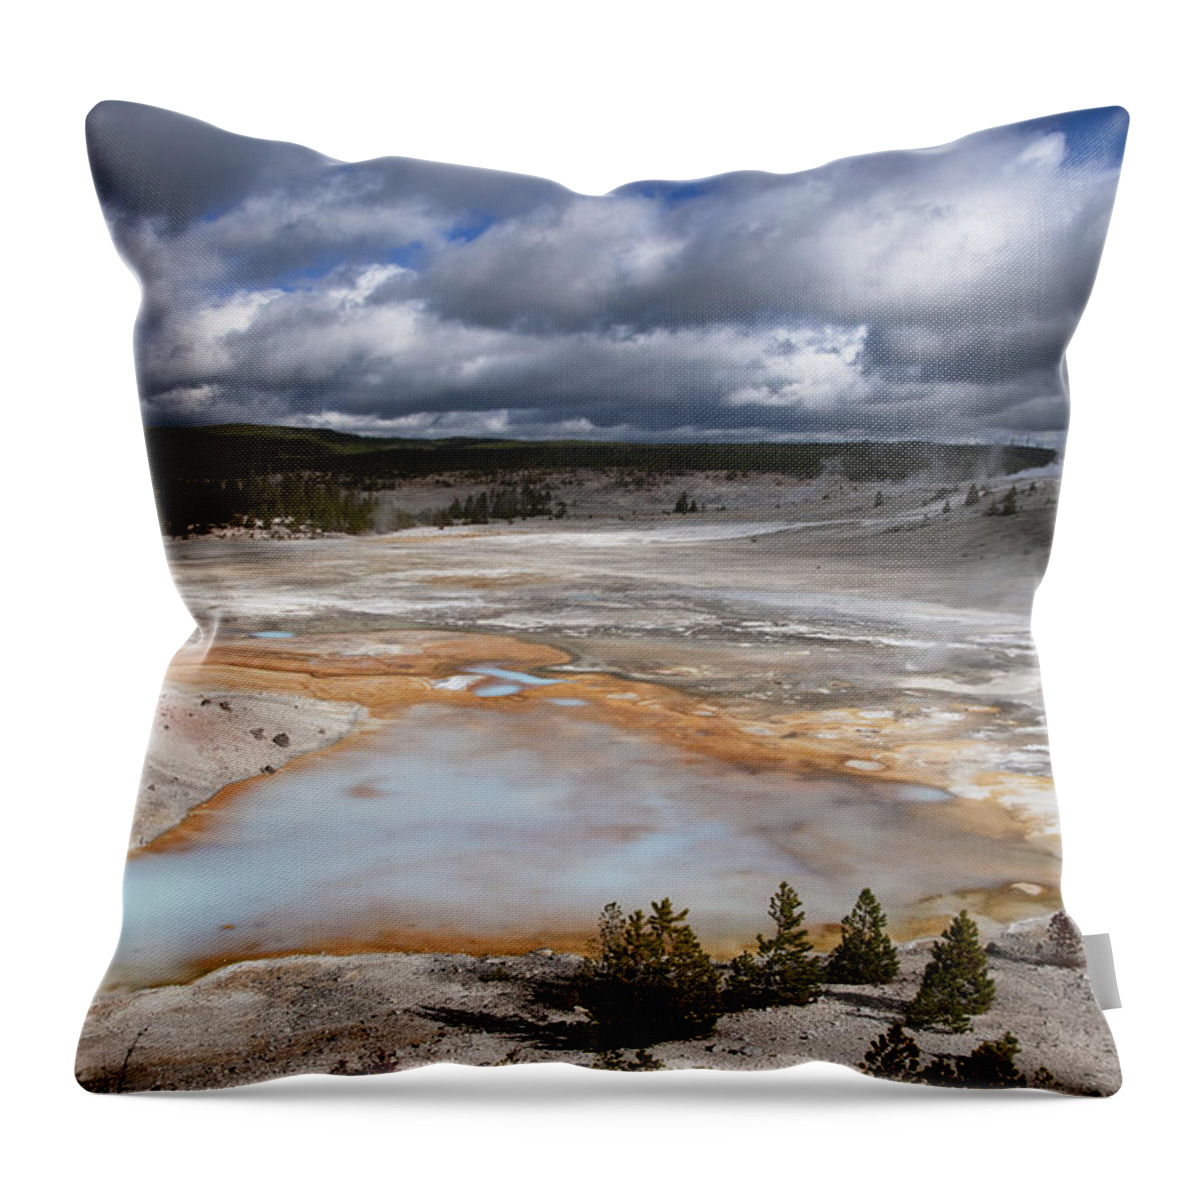 Flpa Throw Pillow featuring the photograph Hotsprings And Stormclouds In Norris by Bill Coster